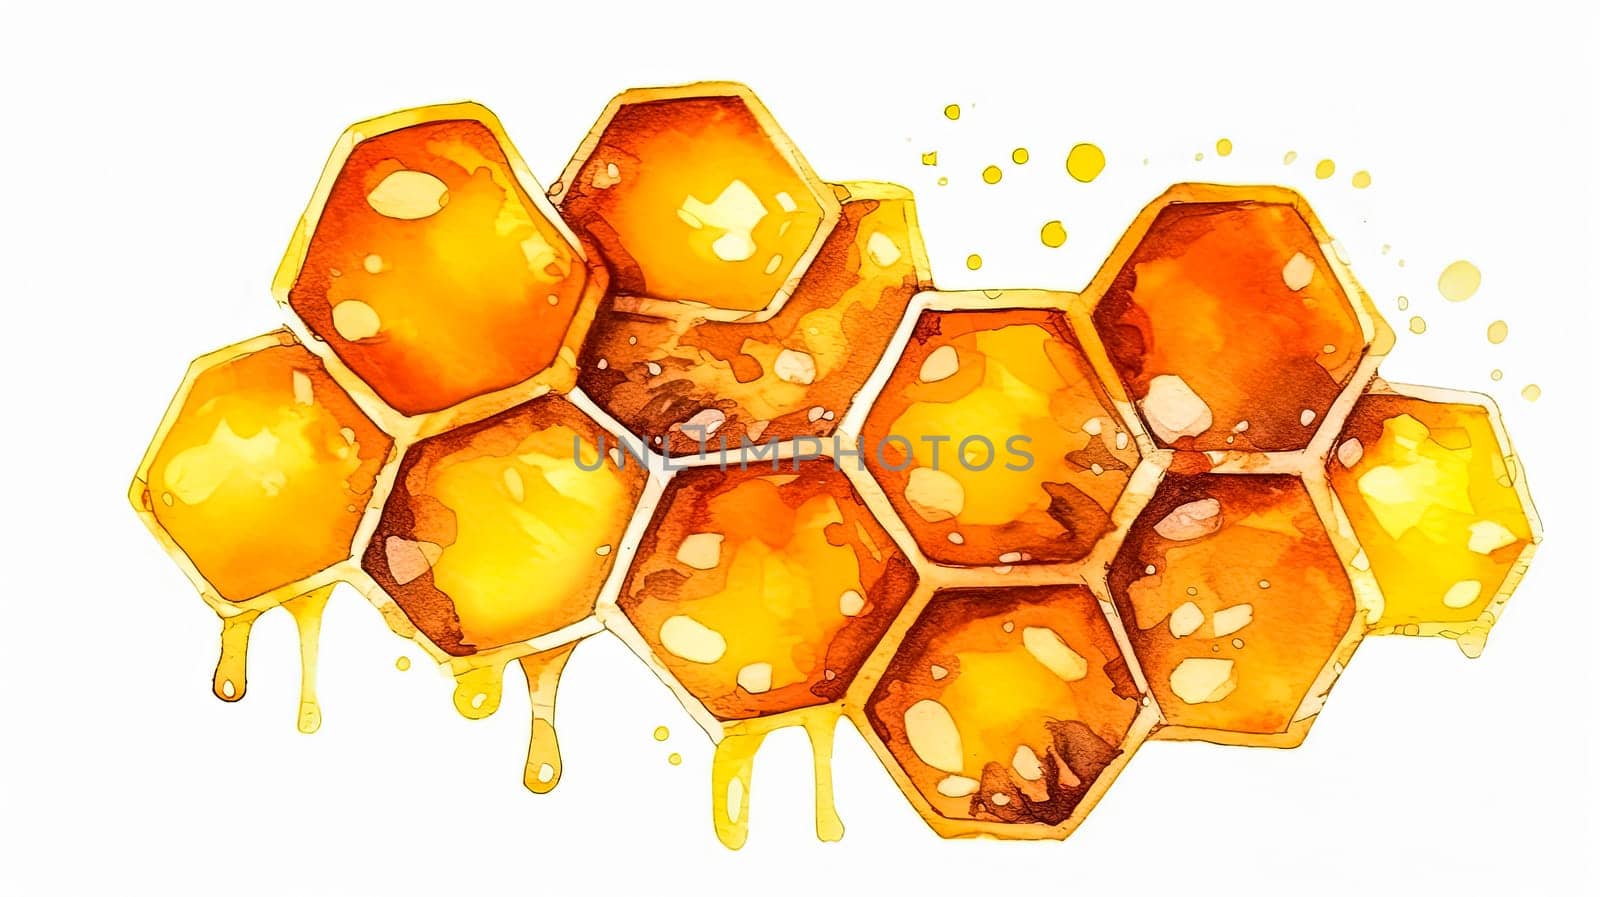 Golden sweetness, Honeycomb in watercolor, a warm and artistic theme capturing the natural beauty of this sweet and delectable treat.